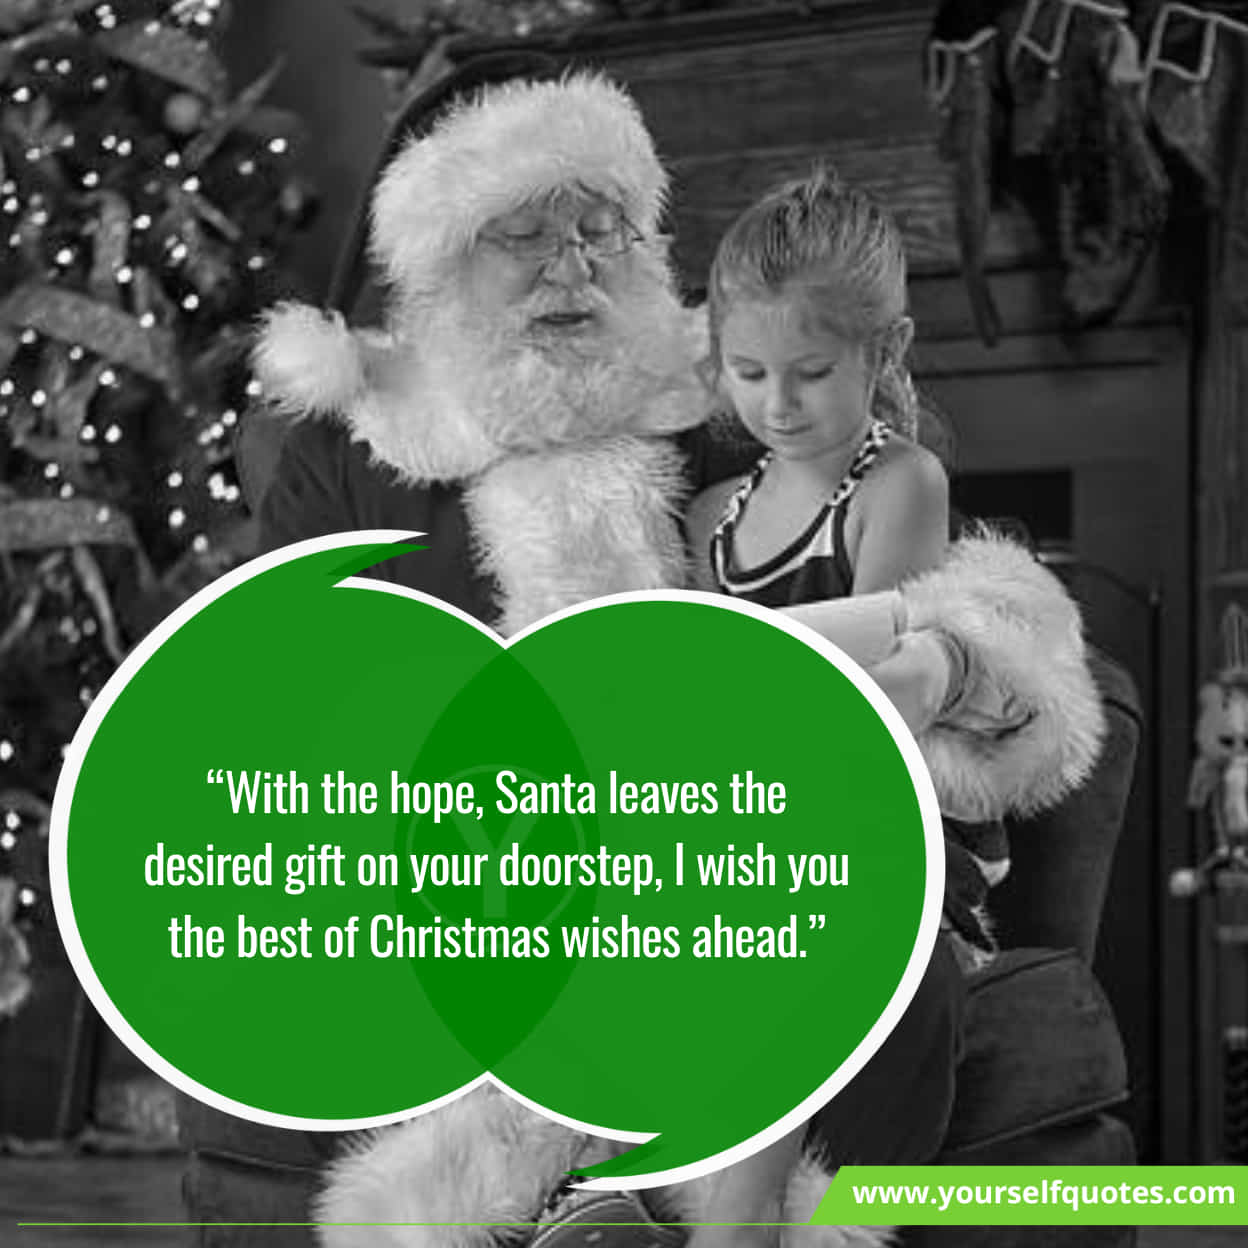 Inspiring Christmas wishes for Special Friends